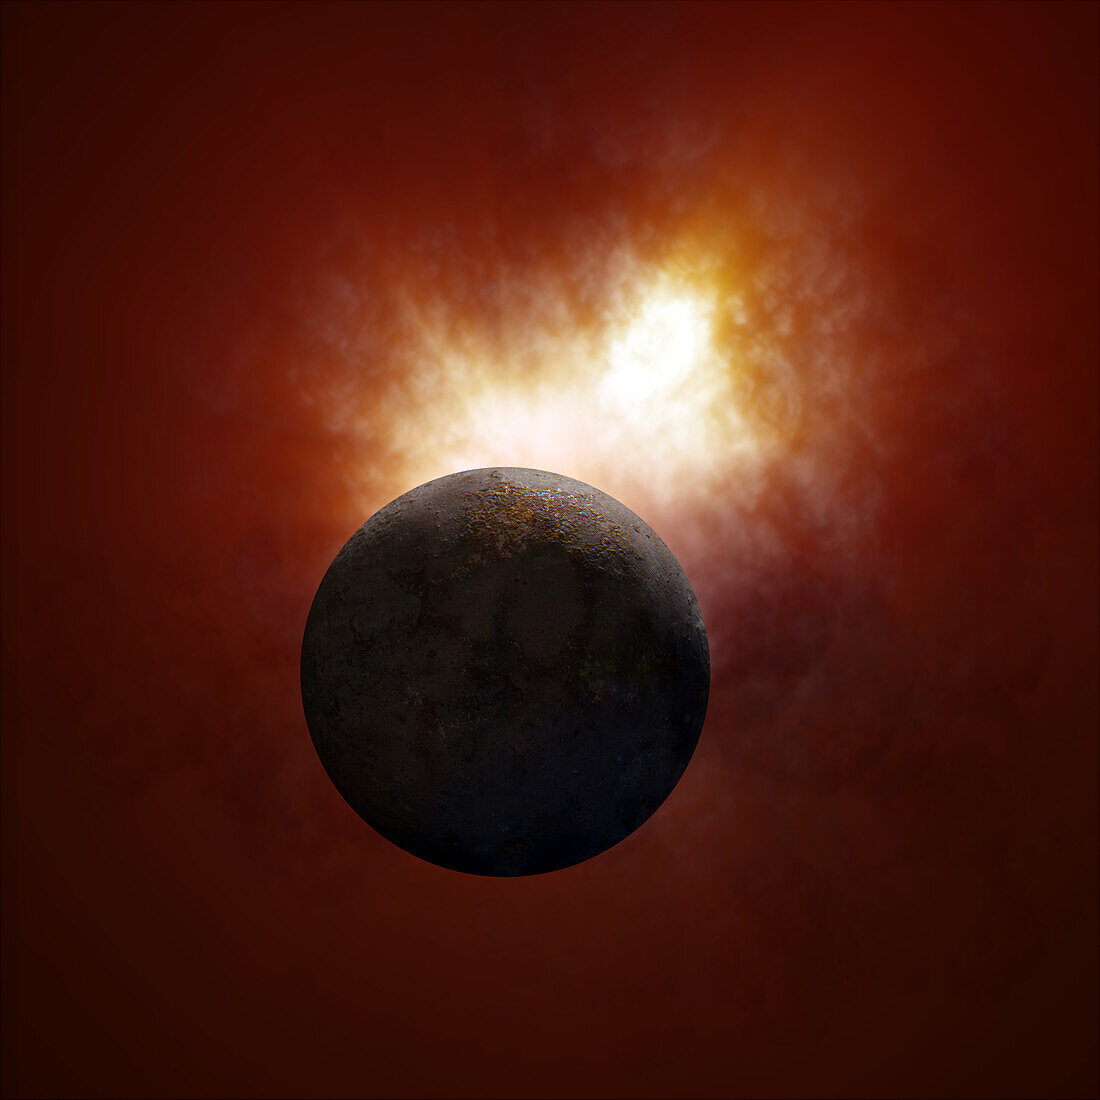 Exoplanet formation in new system, composite image